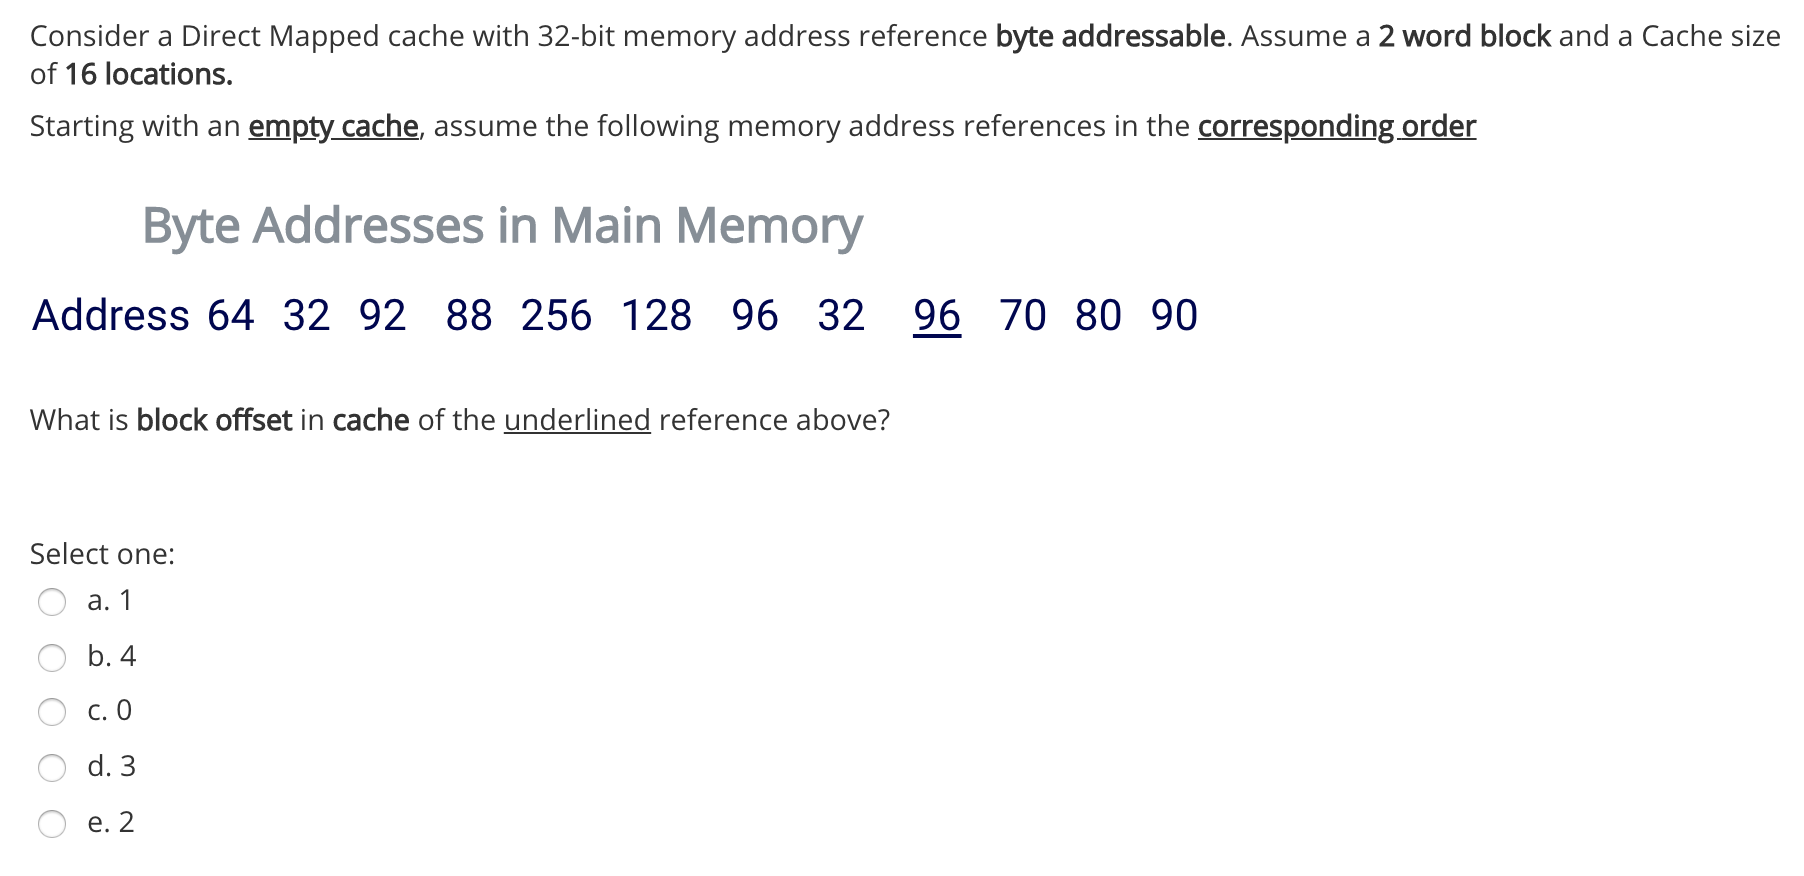 Consider a Direct Mapped cache with 32-bit memory address reference byte addressable. Assume a 2 word block and a Cache size